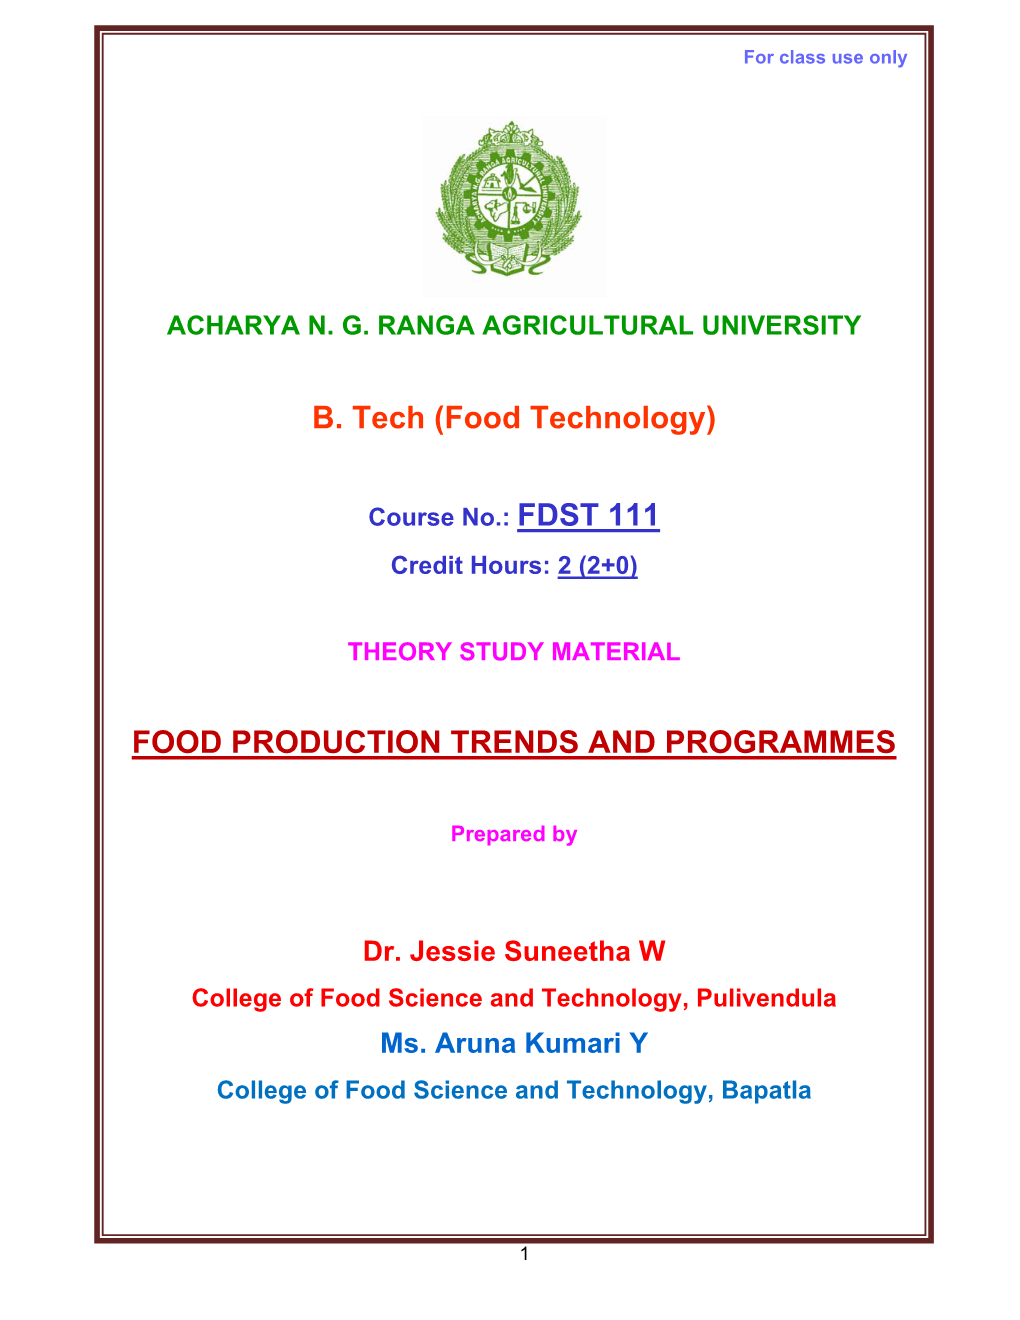 Food Production Trends and Programmes